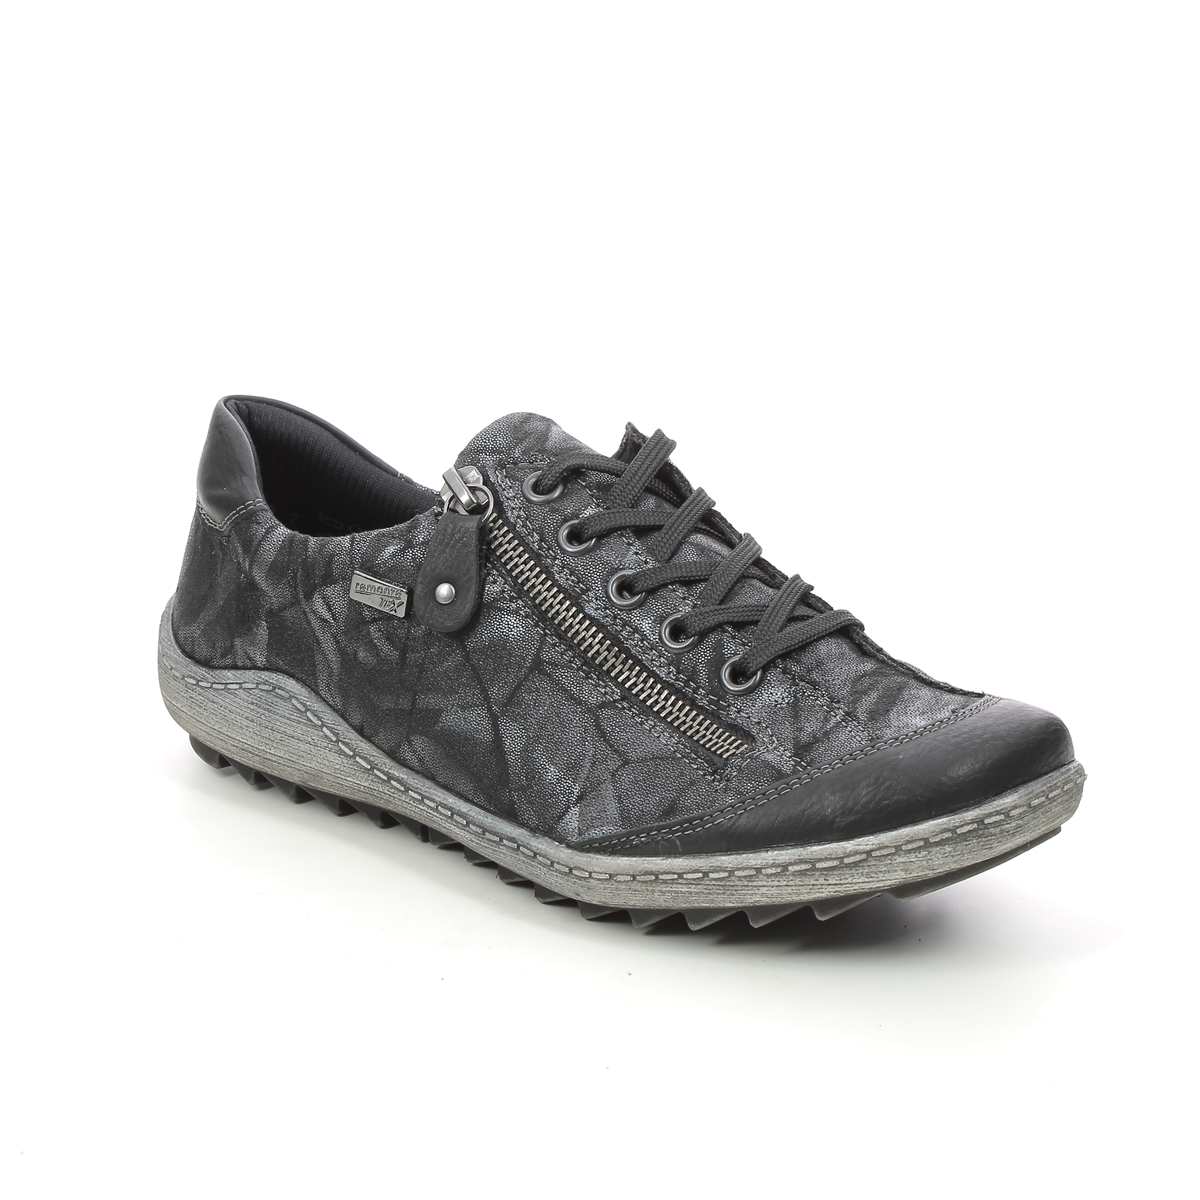 Remonte Zigzip 85 Tex Black Grey Womens Lacing Shoes R1402-05 In Size 40 In Plain Black Grey